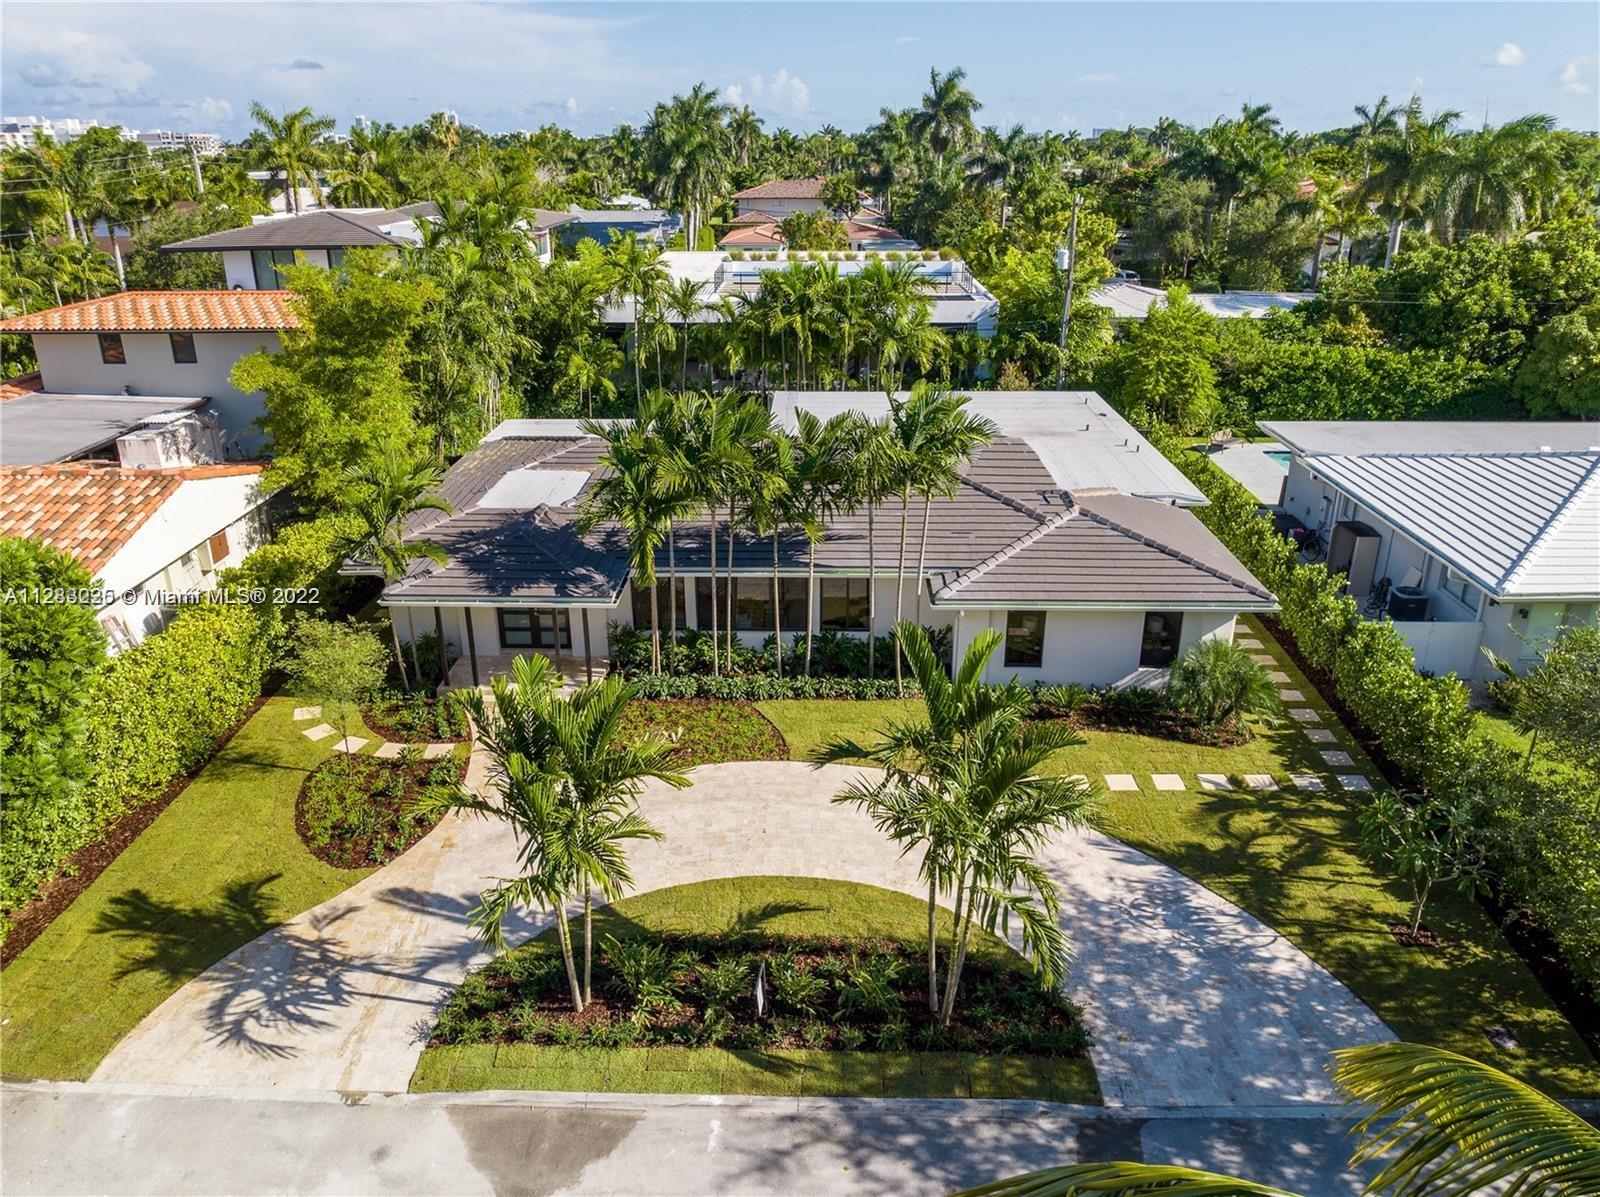 Fine design meets resort luxury with this beautifully redesigned Bay Harbor Islands home. Completed in July 2022, it features 4 bedrooms + a den and 4.5 bathrooms on an oversized 10,938 ft.² lot. The fabulous floorplan connects the generous living room, sun-filled dining room, and high-end open kitchen with rich wood cabinetry, quartzite stone countertops, and Wolf & Dacor appliances, including an oversized gas stove. Relax, refresh, and entertain in style with a new patio and saltwater pool surrounded by lush palms. The home has high-impact windows & doors, new plumbing & electric, gas water heater & dryer, and a control 4 smart home system. Living area is 3,324 Sq.Ft